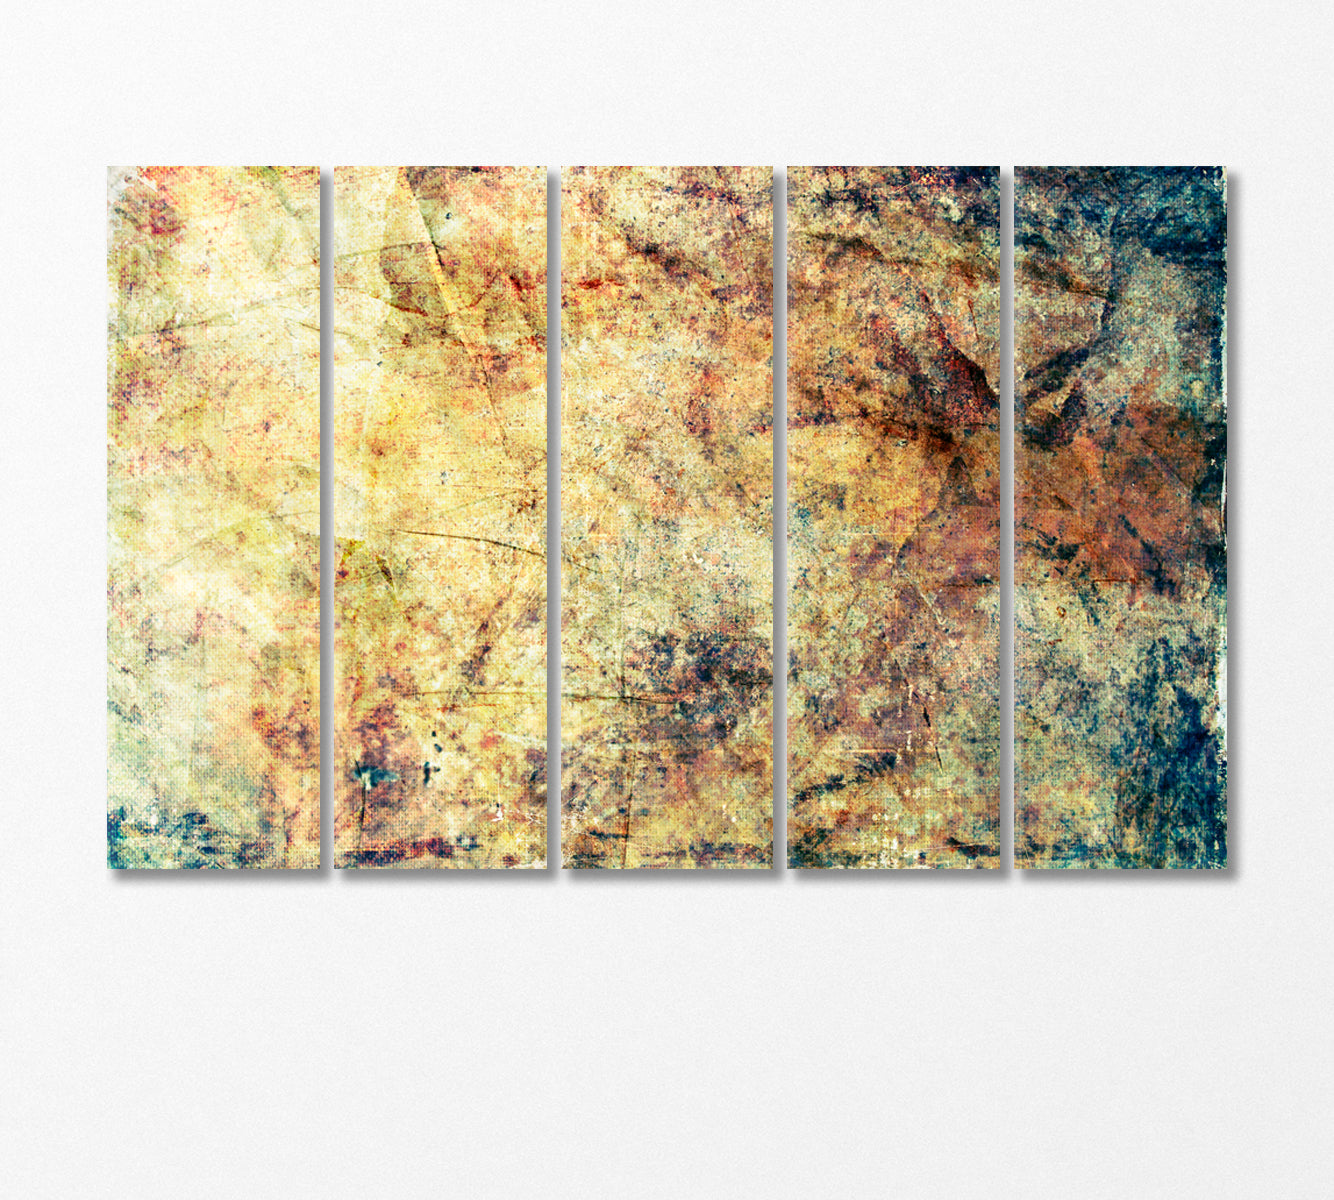 Wall Fragment with Scratches and Cracks Canvas Print-Canvas Print-CetArt-5 Panels-36x24 inches-CetArt